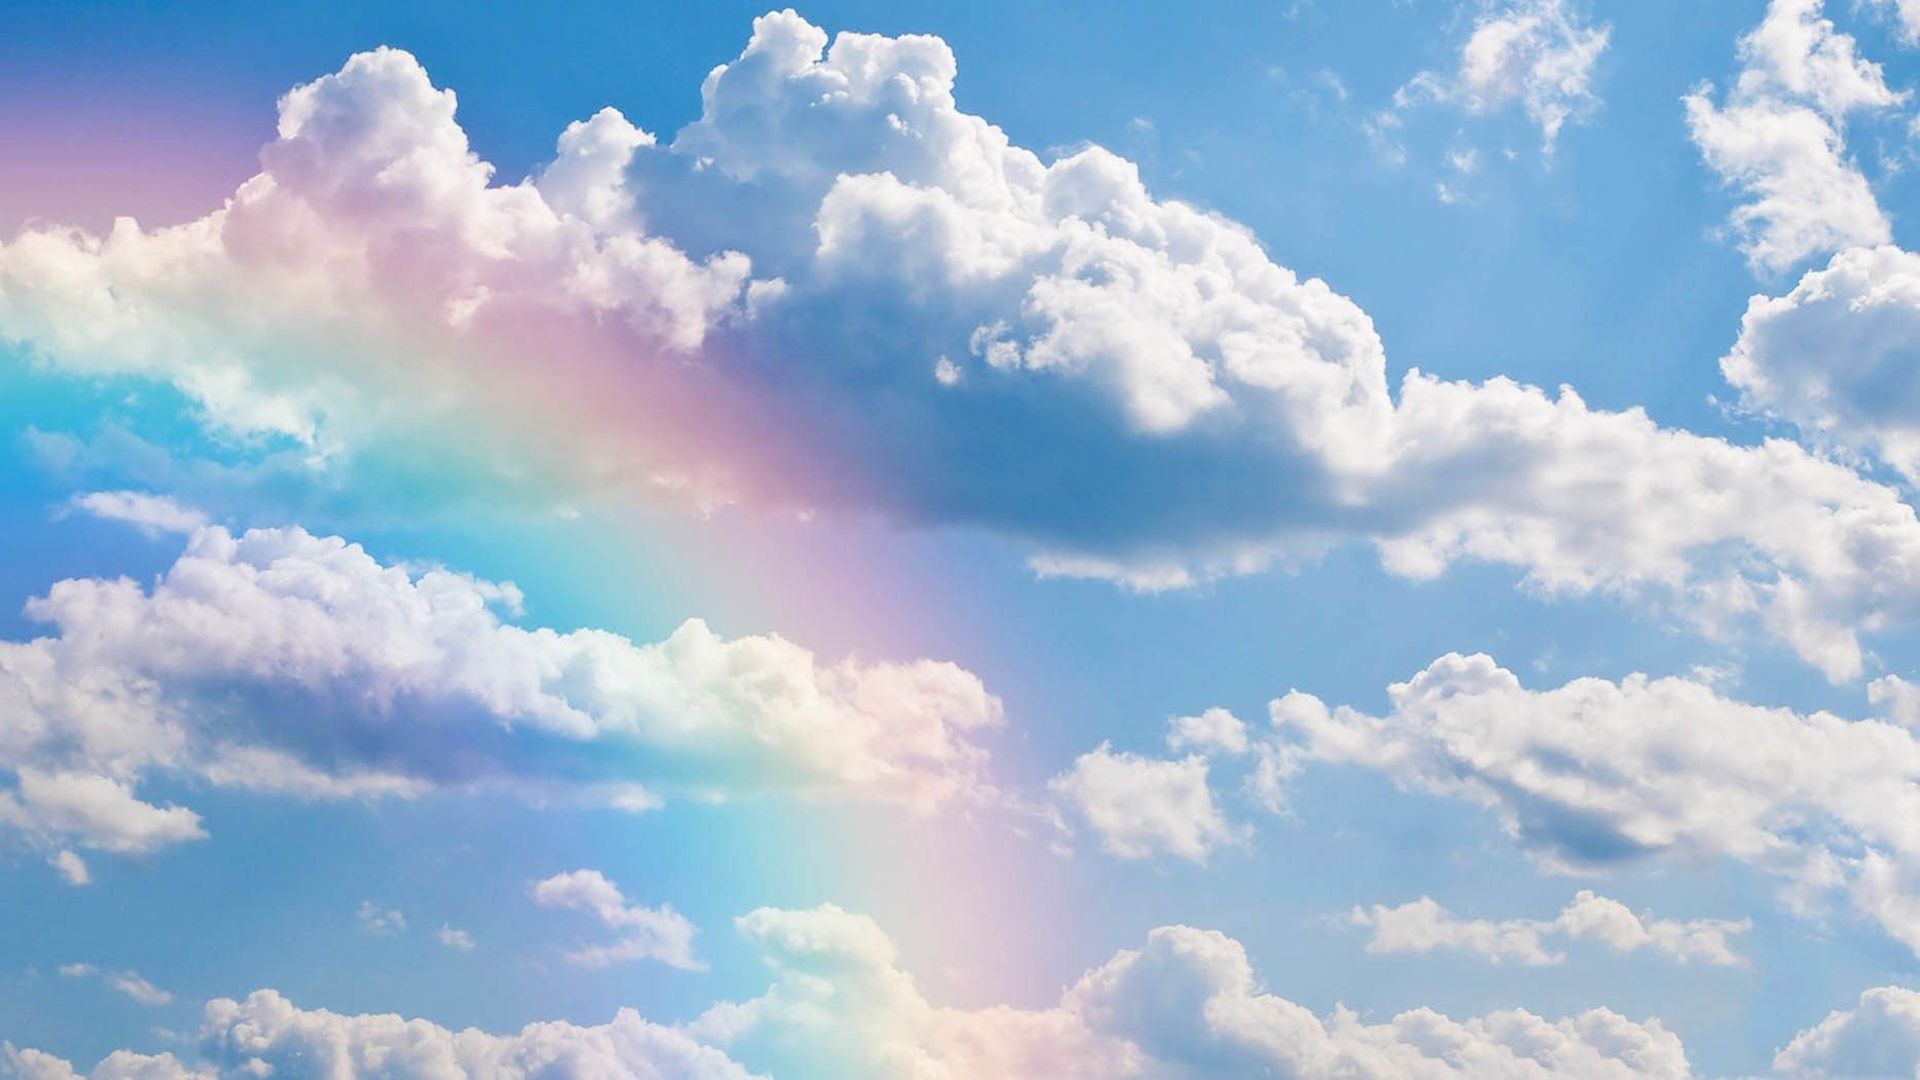 A rainbow appears in the sky above the clouds - Cloud, vintage clouds